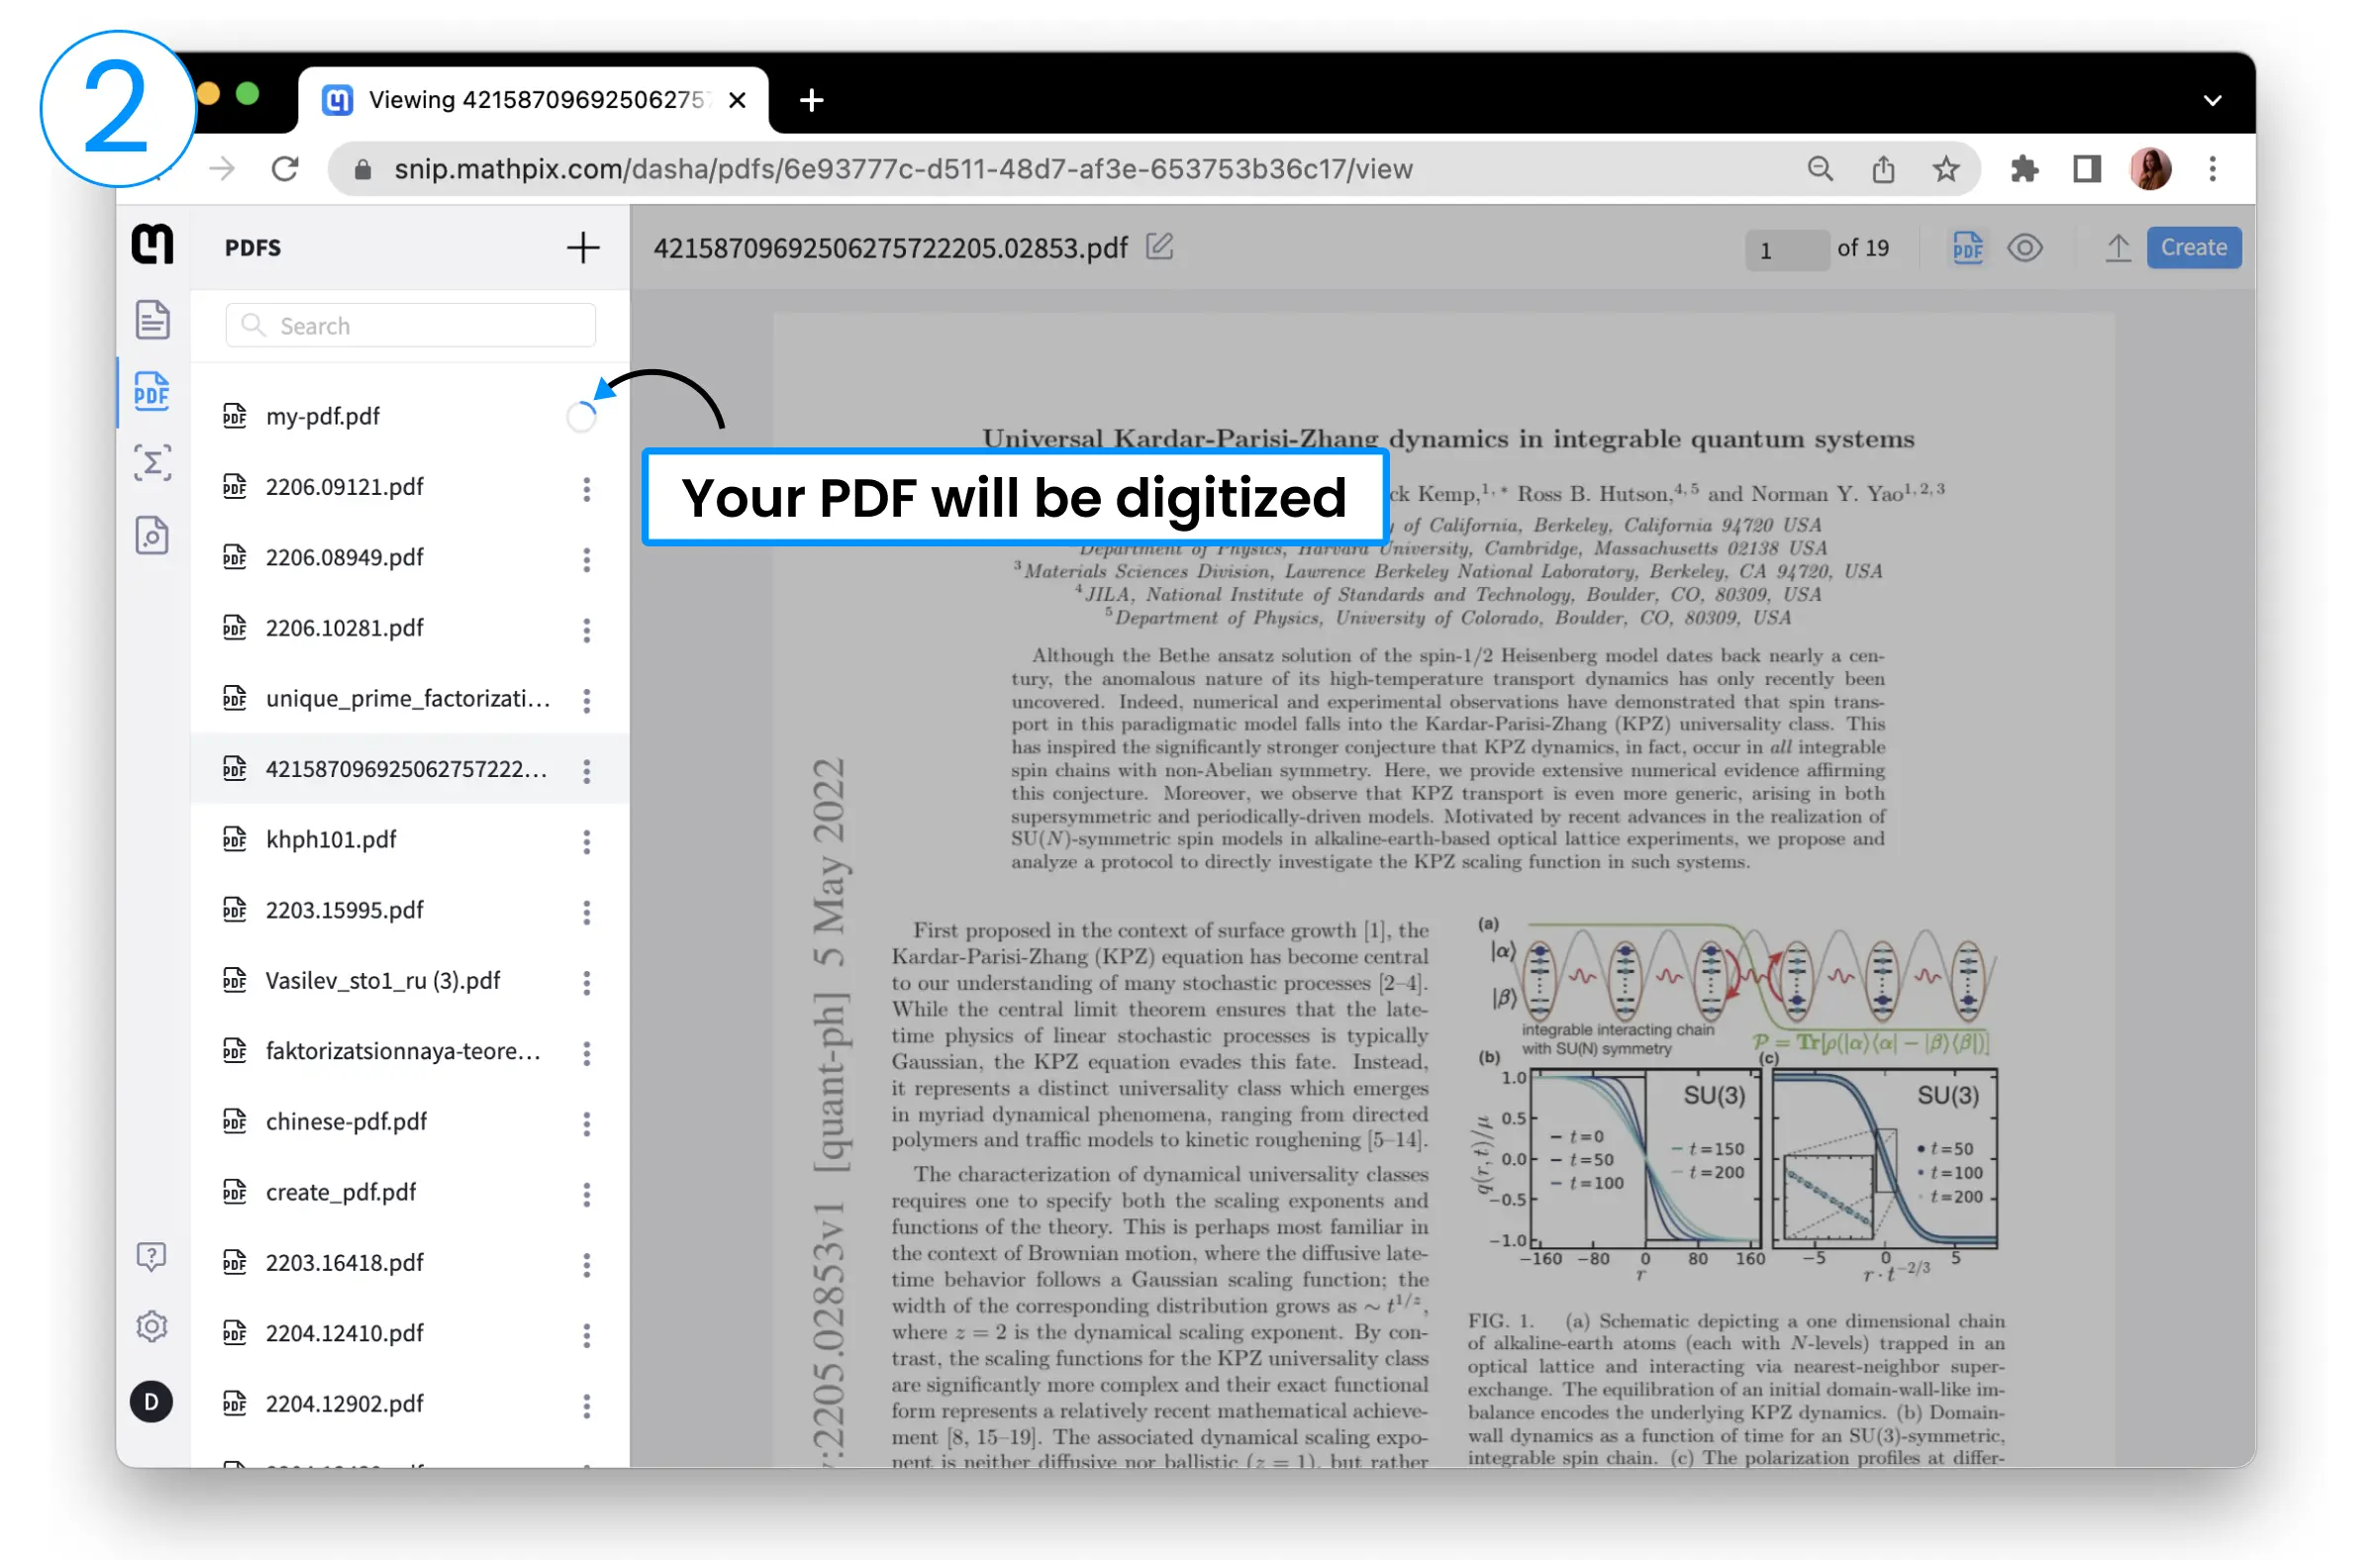 PDF is being processed